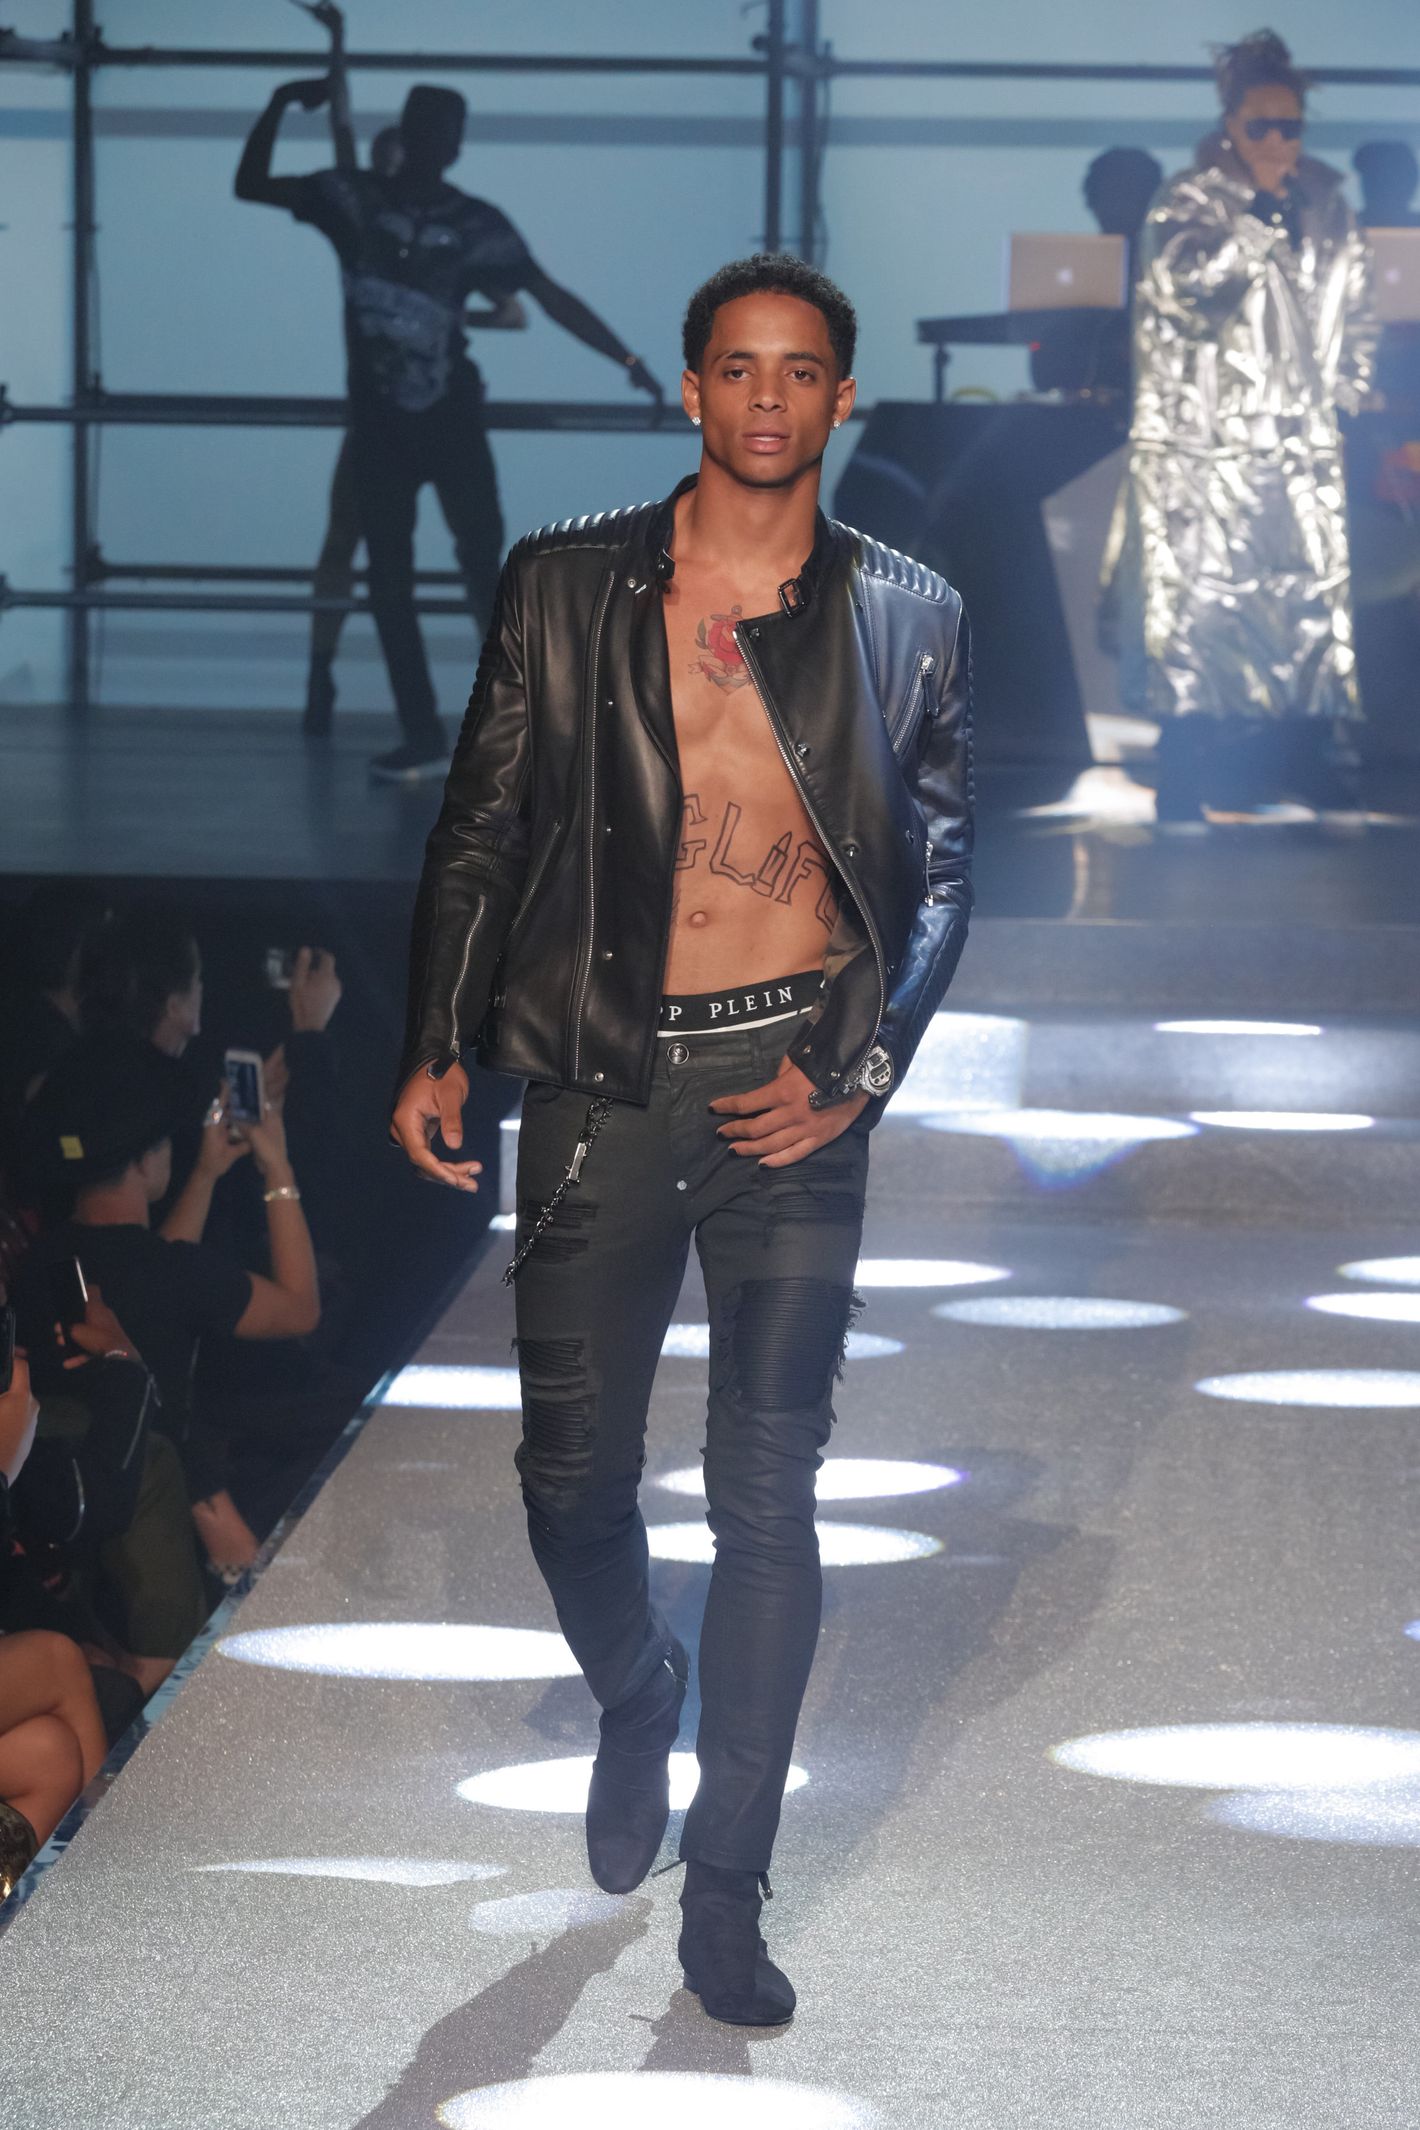 Philipp Plein Celebrates 20 Years With A Controversial Show At New York  Fashion Week